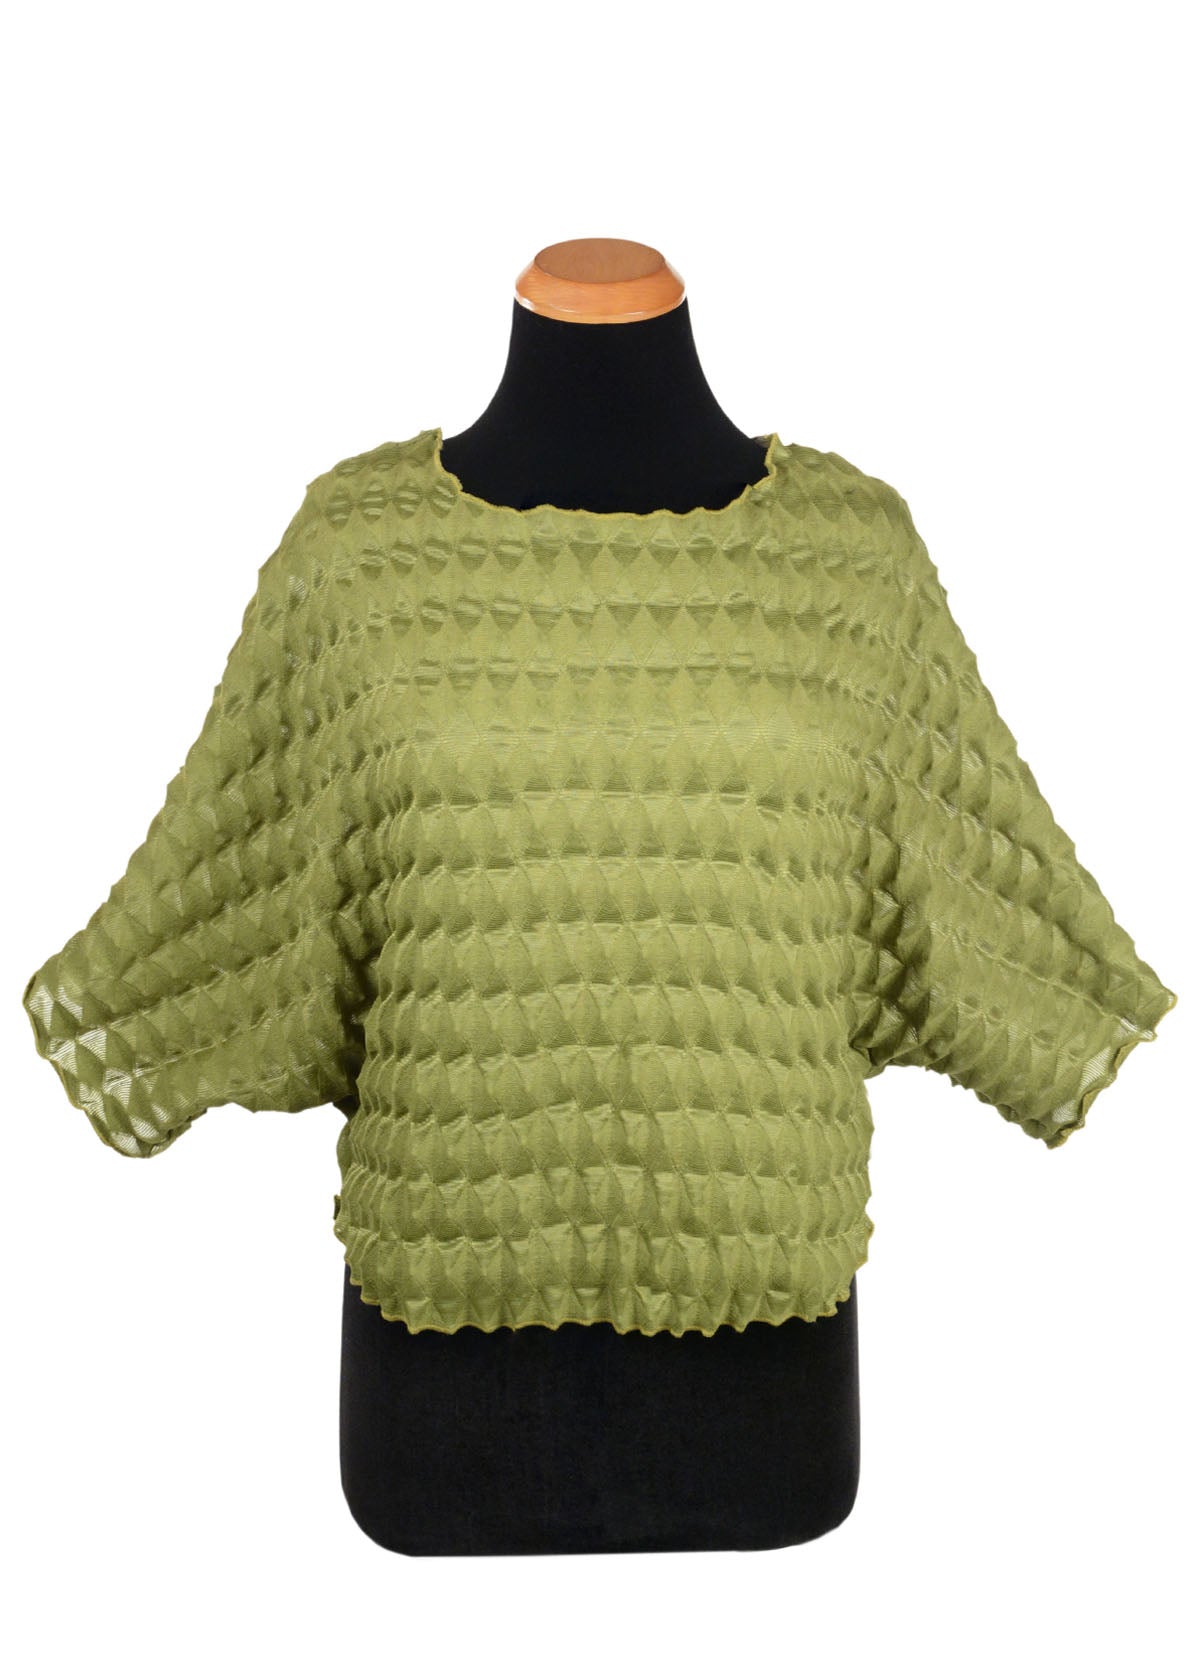 Product photo of the Batwing Top in Avocado, from the Fractal Collection. LYC and Pandemonium Seattle are handmade in Seattle, WA, USA.